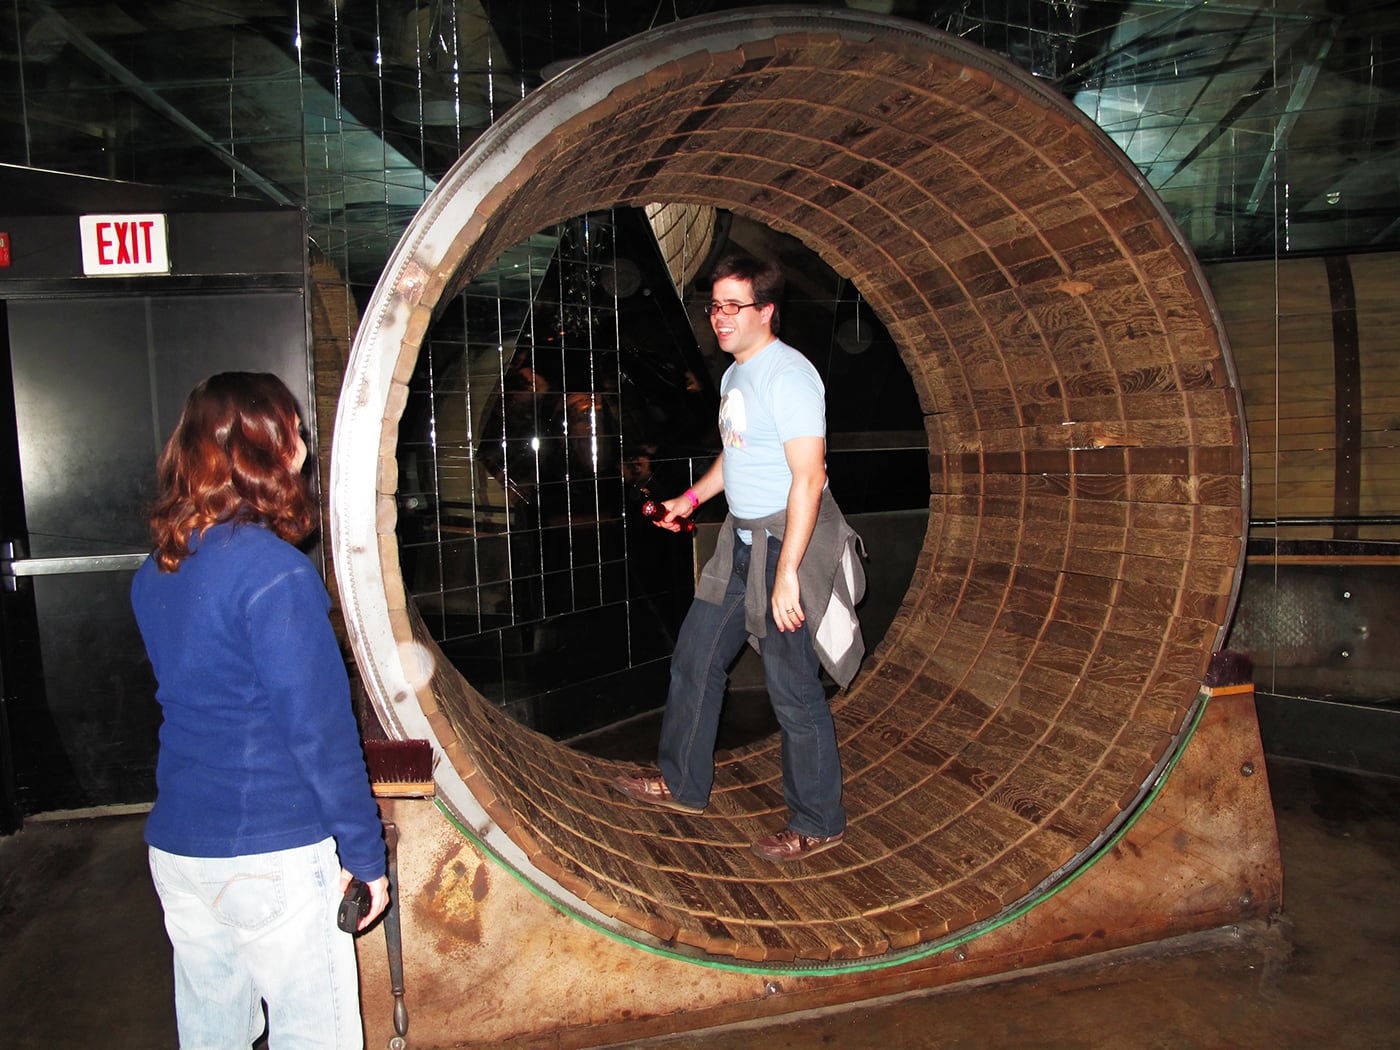 Human Hamster Wheel at the City Museum - Silly America